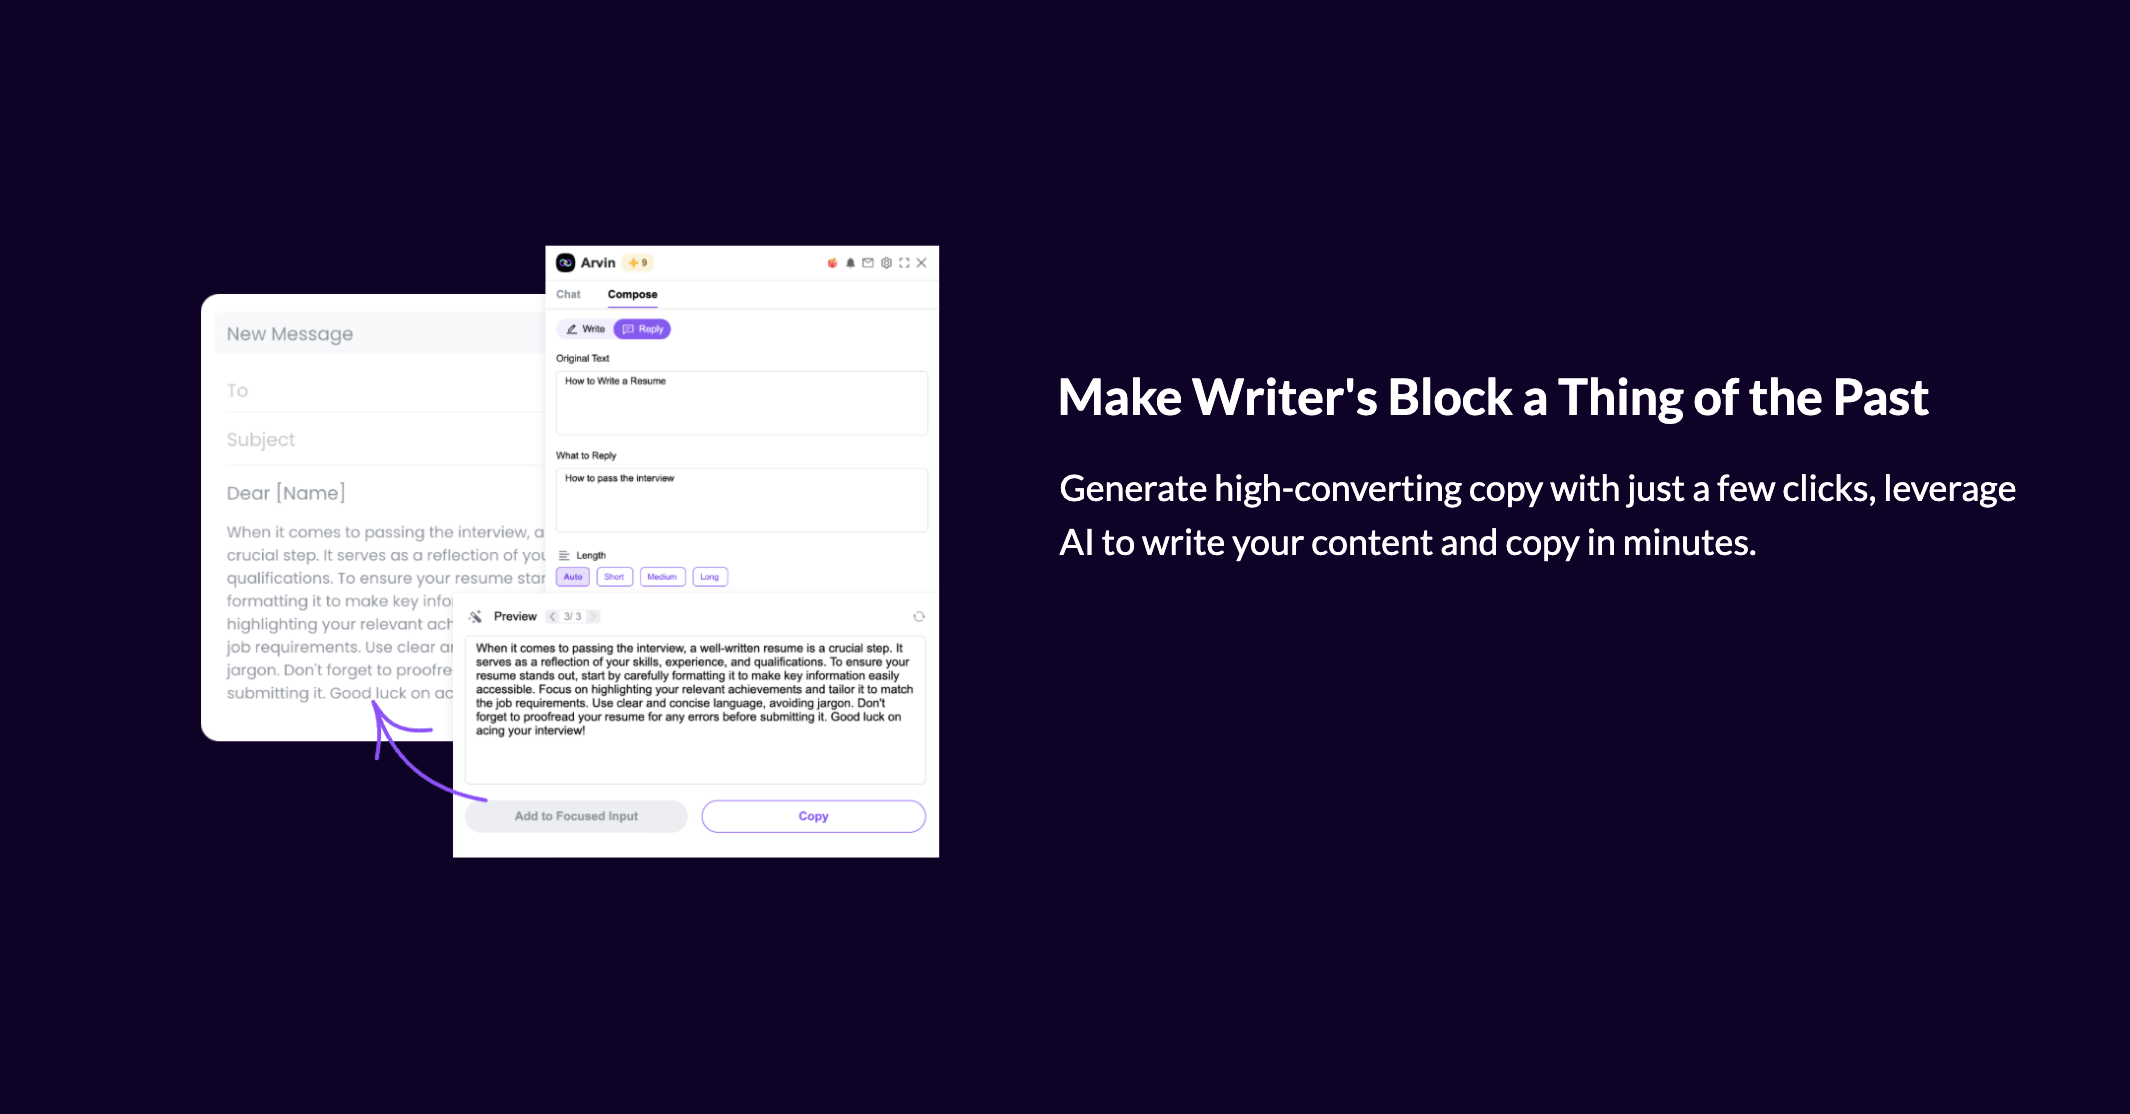 Make writer's block a thing of the past